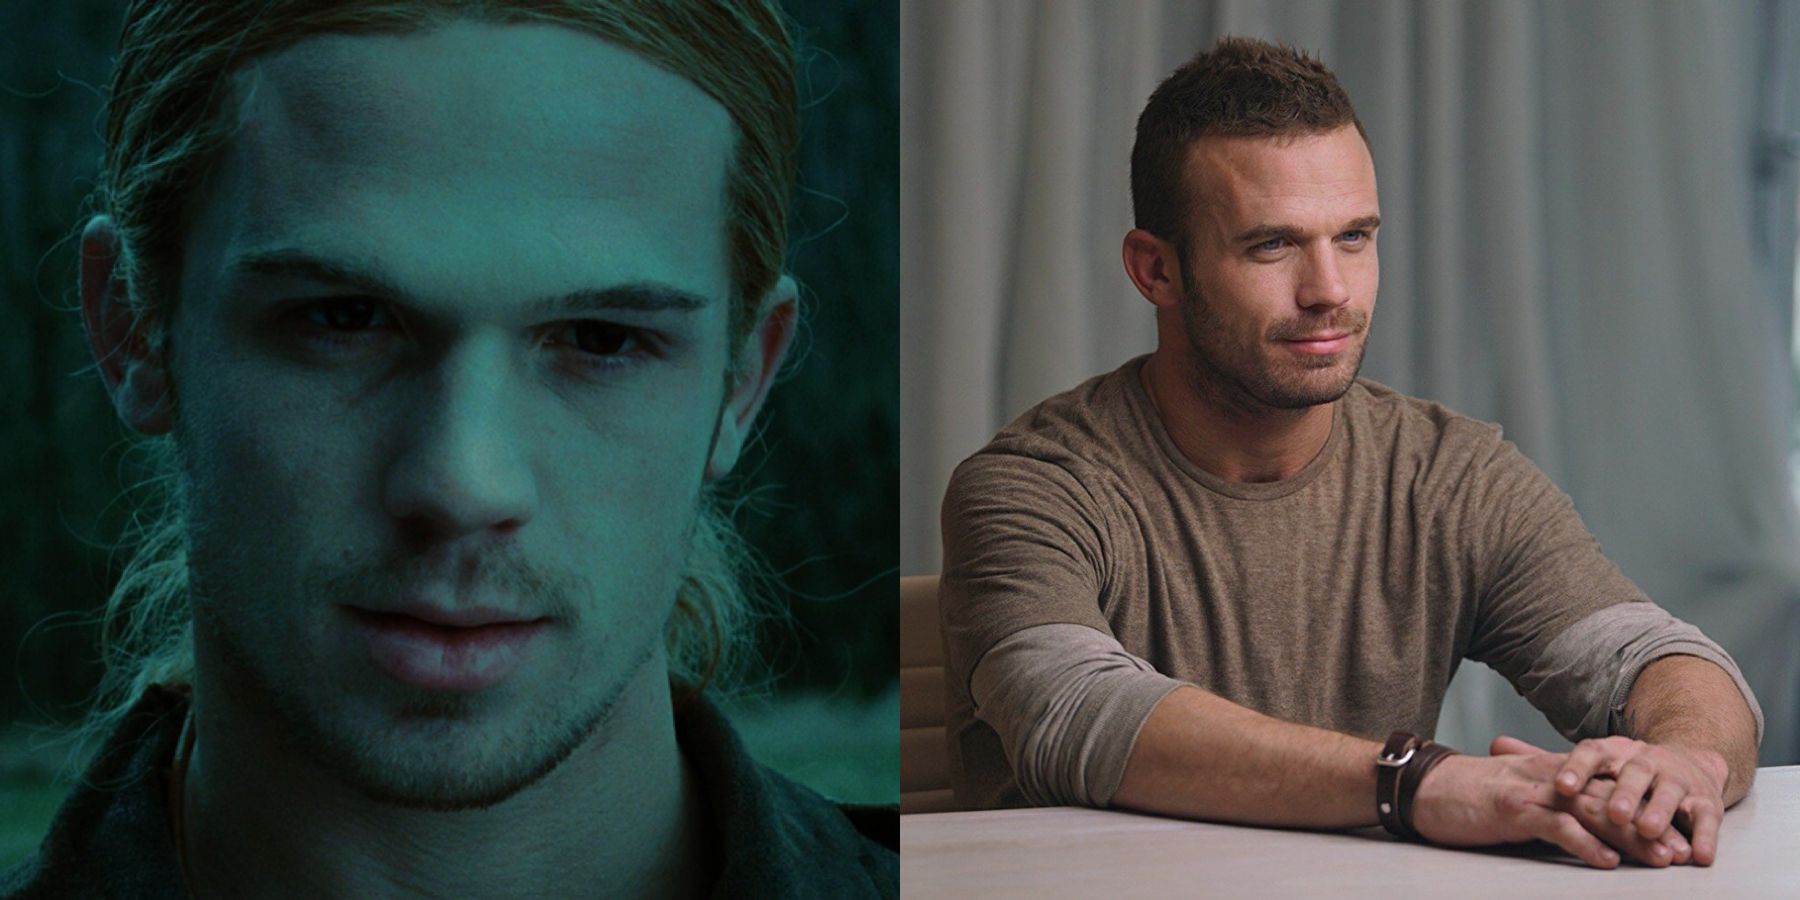 Twilight Everything The Movies Left Out About Cam Gigandet’s Villain James